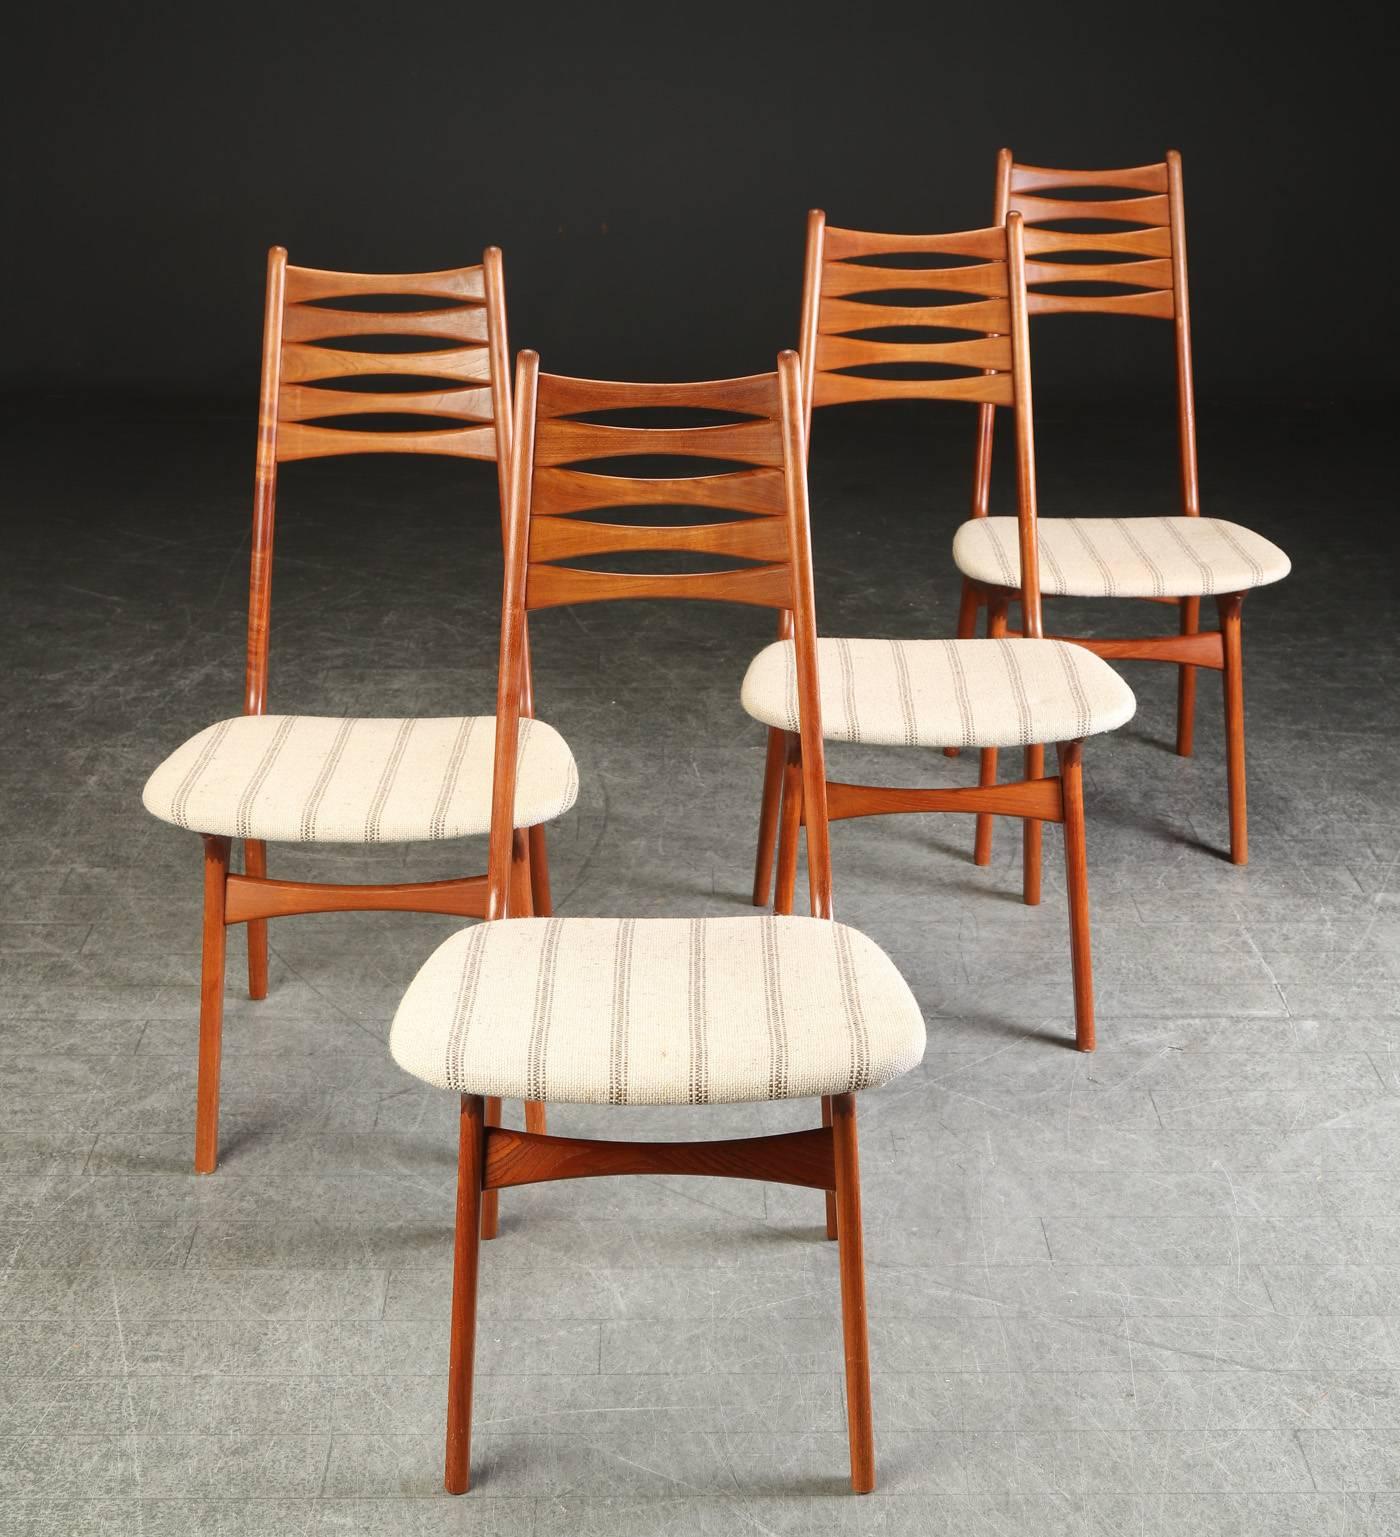 Sculptural model 83 dining chairs designed by Niels Møller in the 1960´s with ample seat pad and high backs with trademark elongated spaces between the back braces. With a flowing organic design, the natural teak grains flow seamlessly throughout